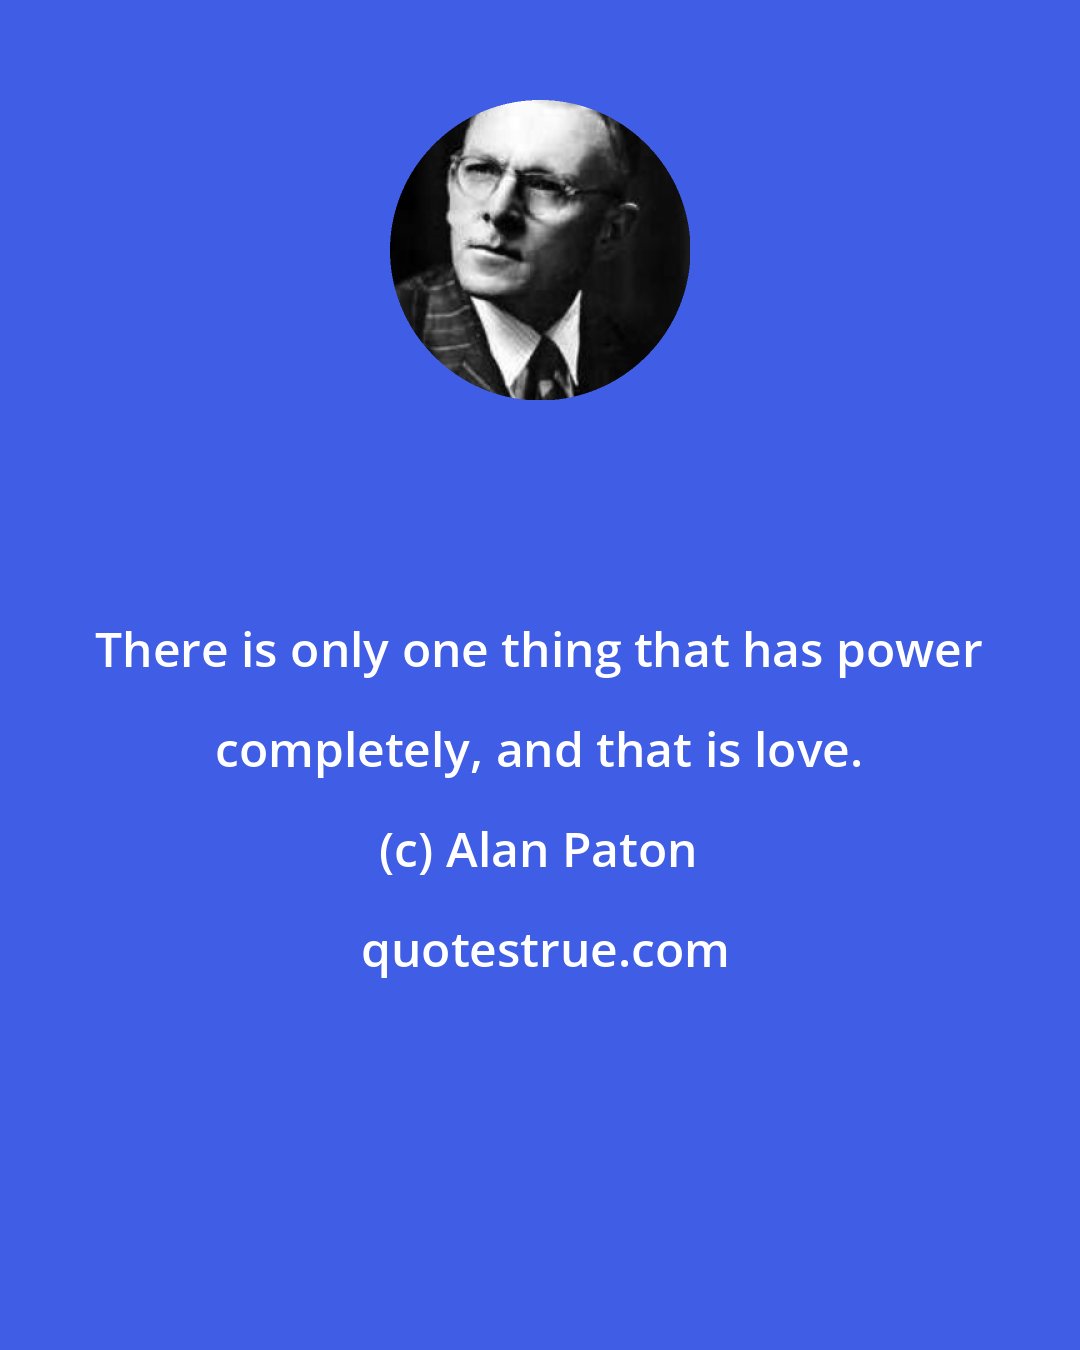 Alan Paton: There is only one thing that has power completely, and that is love.